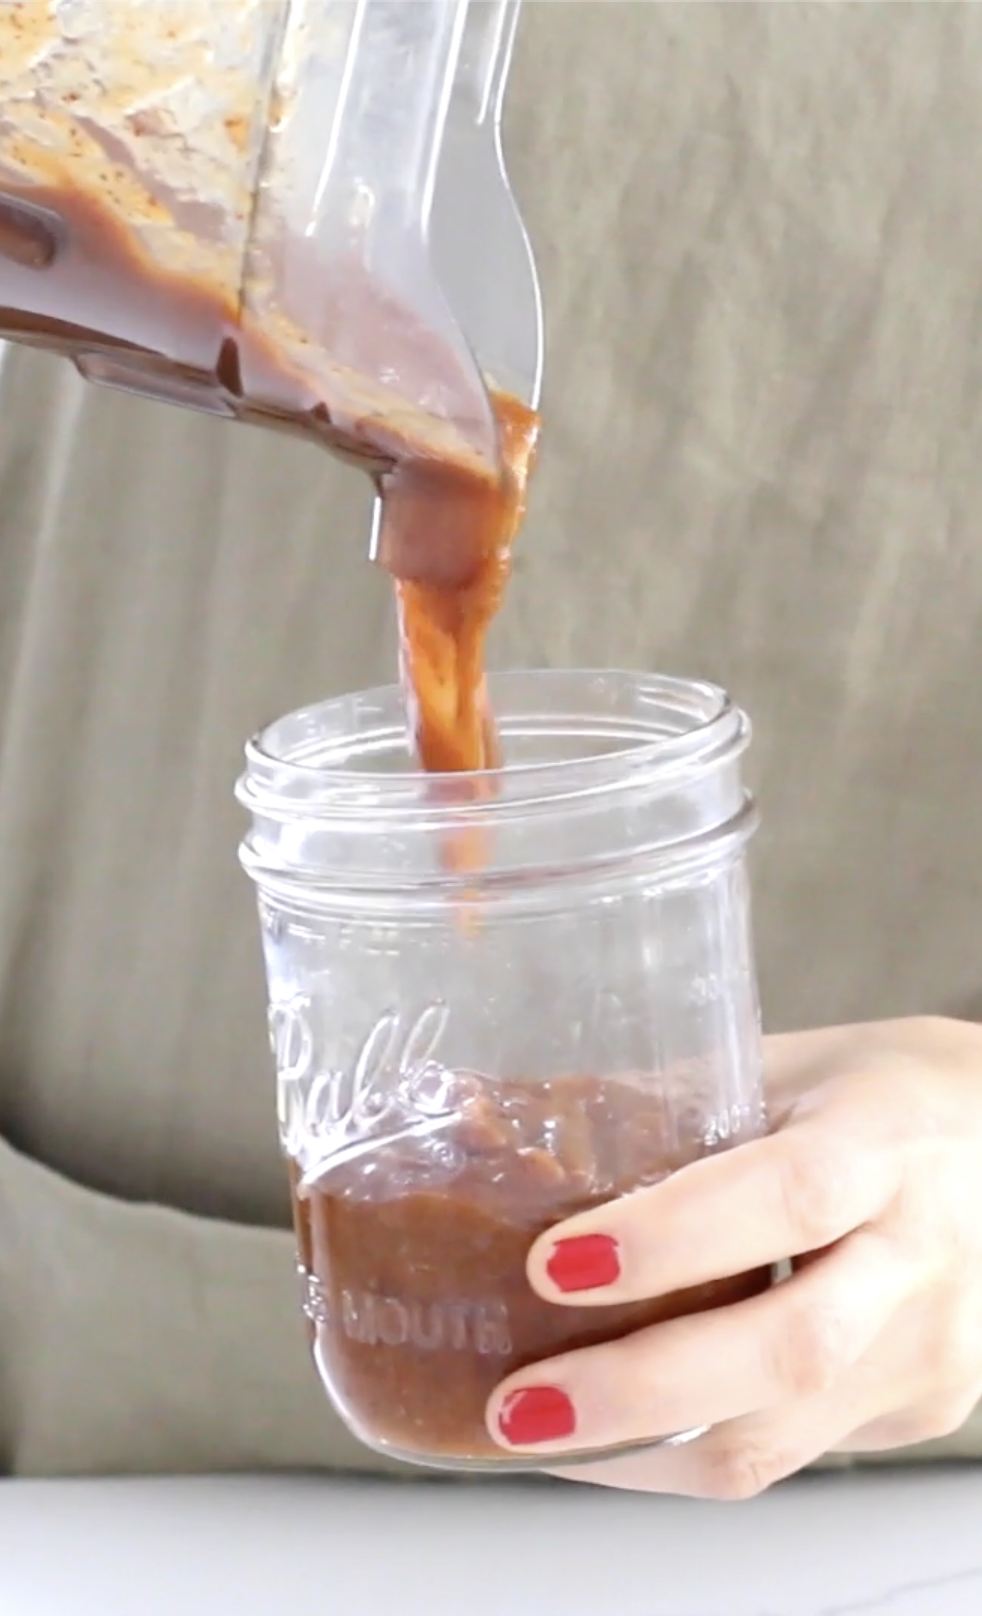 A person with red nail polish is pouring a thick, dark brown chamoy sauce from a clear blender into a glass mason jar, both held by hands partially visible in the image.